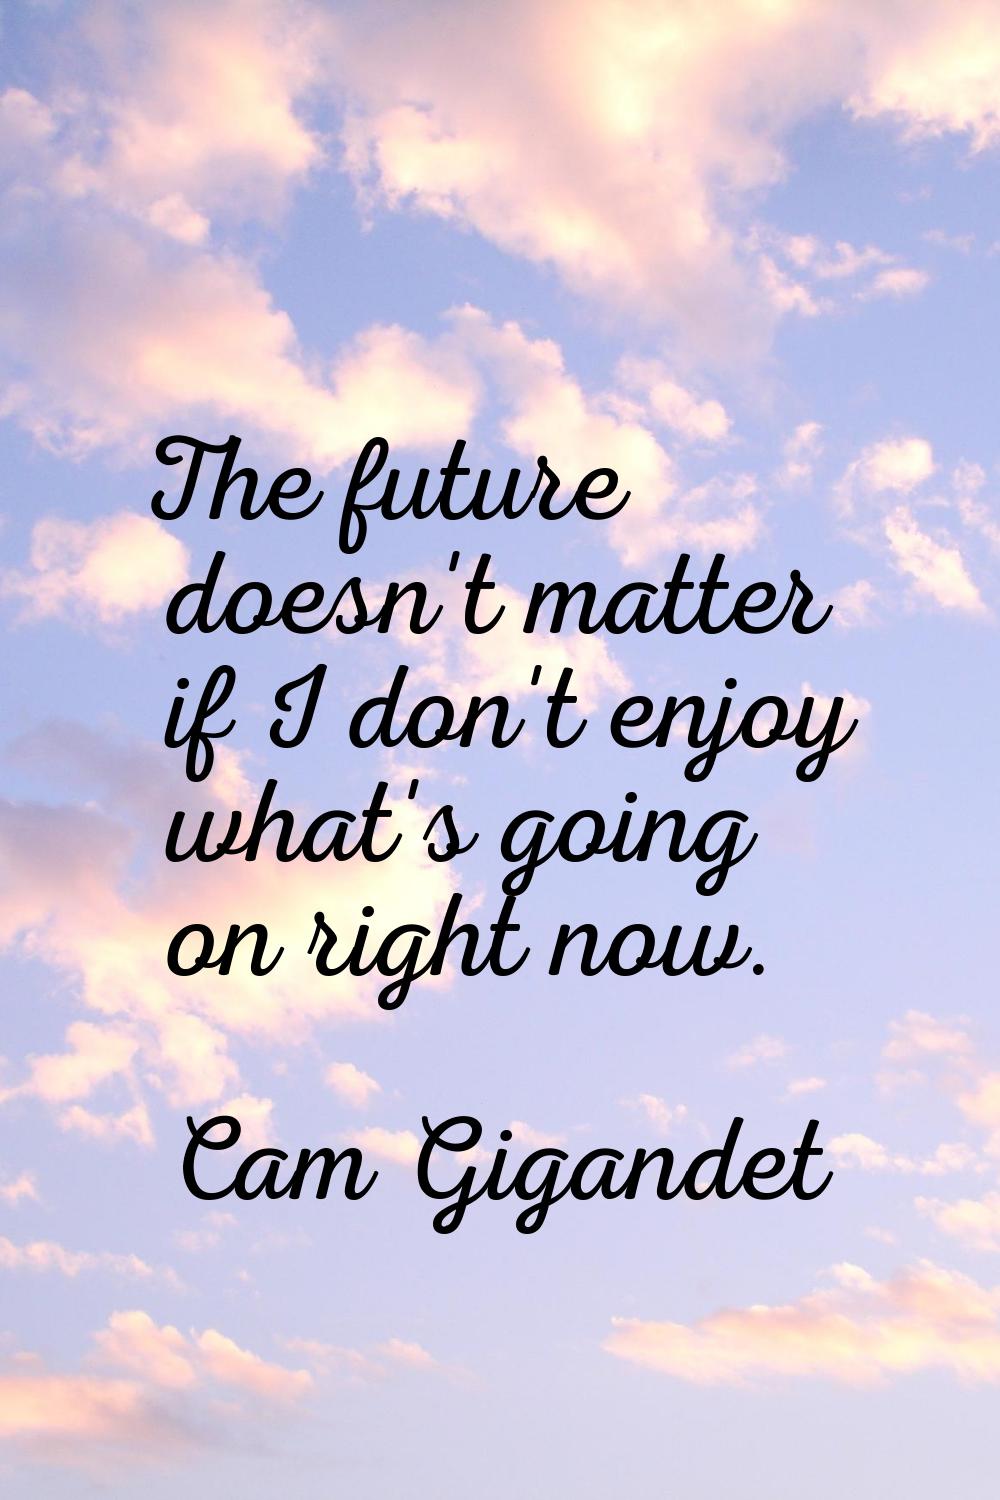 The future doesn't matter if I don't enjoy what's going on right now.